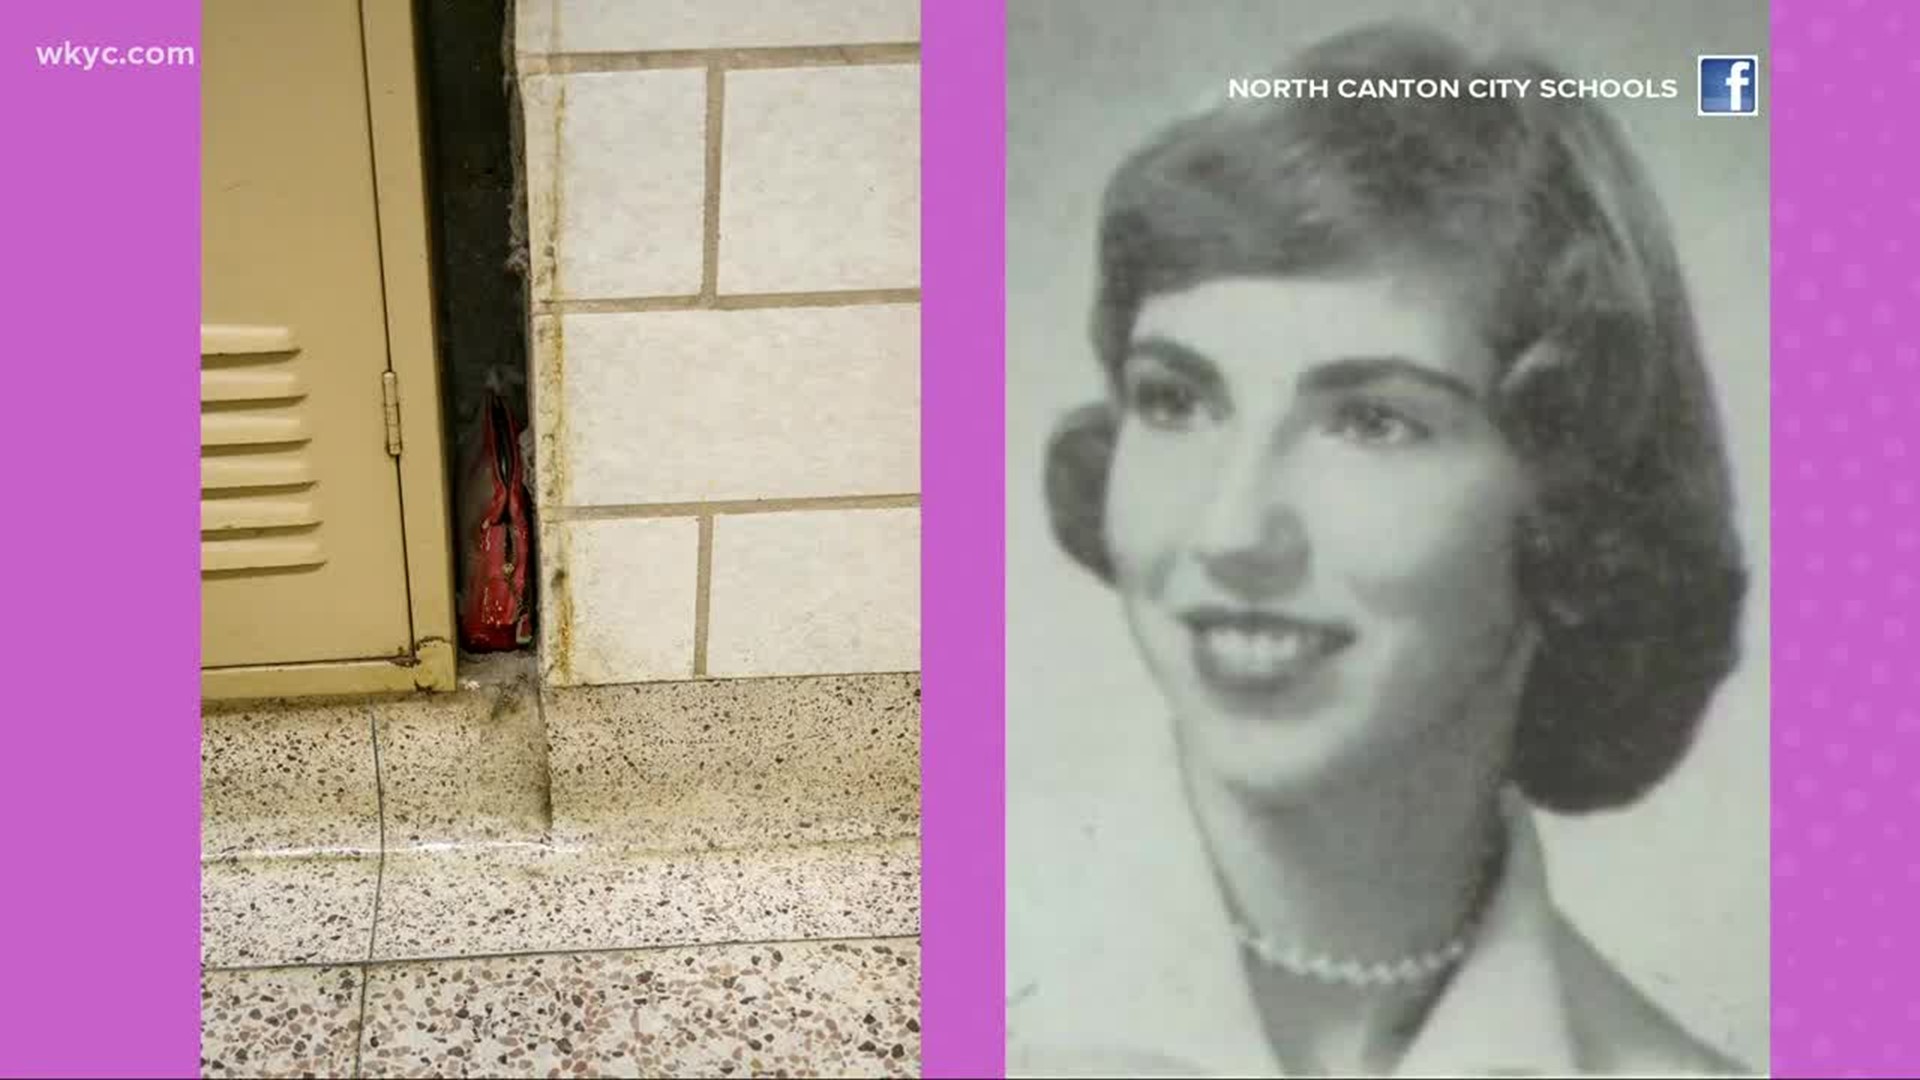 Lost purse from 1957 discovered inside wall of Ohio school | WKRN News 2